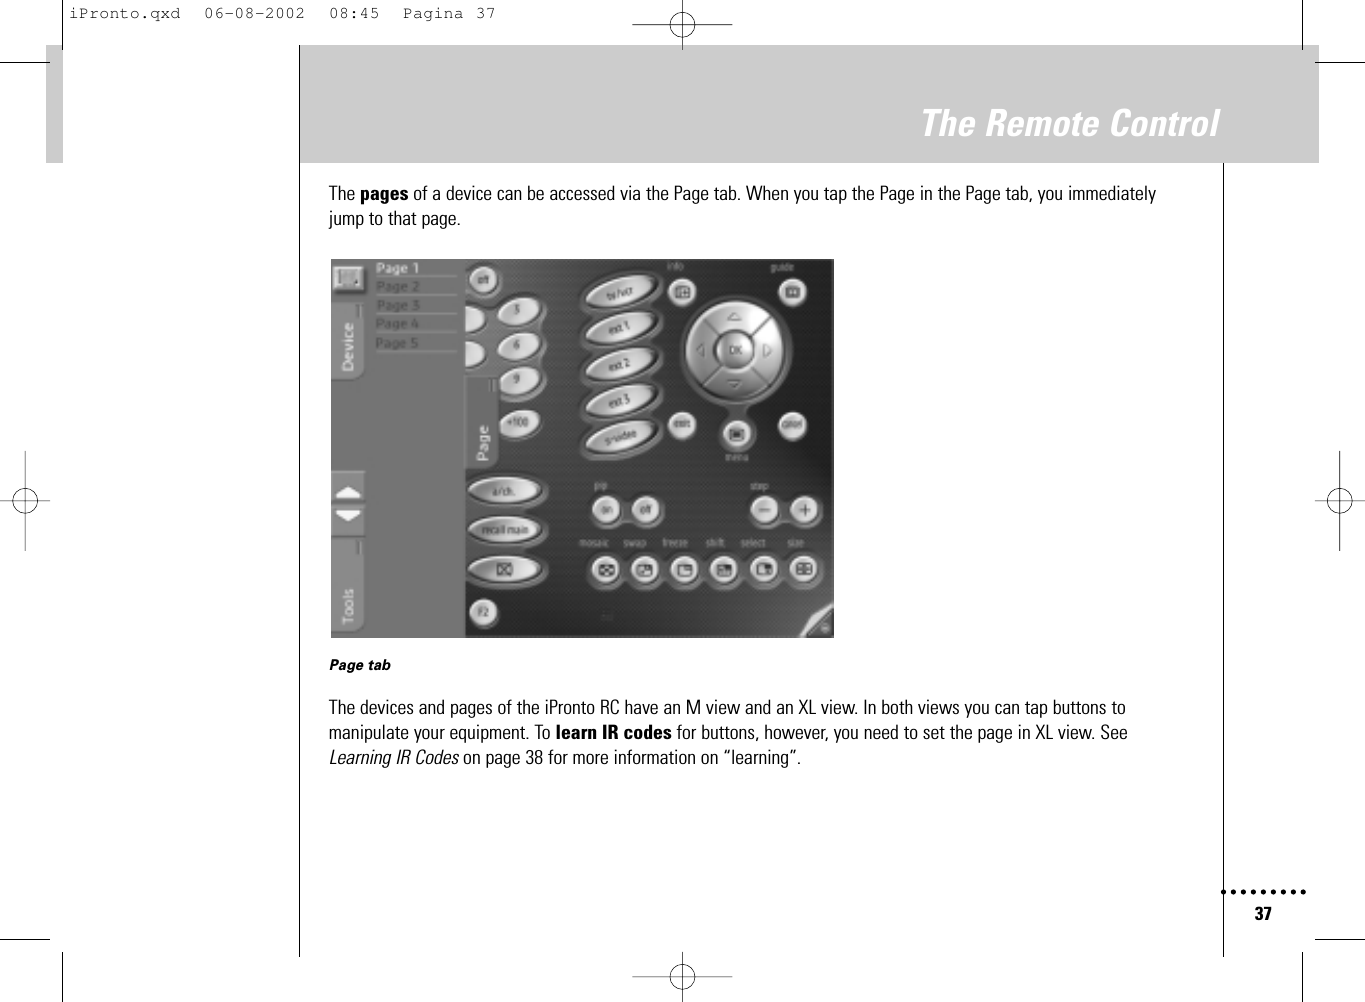 37The Remote ControlThe pages of a device can be accessed via the Page tab. When you tap the Page in the Page tab, you immediatelyjump to that page.Page tabThe devices and pages of the iPronto RC have an M view and an XL view. In both views you can tap buttons tomanipulate your equipment. To learn IR codes for buttons, however, you need to set the page in XL view. SeeLearning IR Codes on page 38 for more information on “learning”.iPronto.qxd  06-08-2002  08:45  Pagina 37